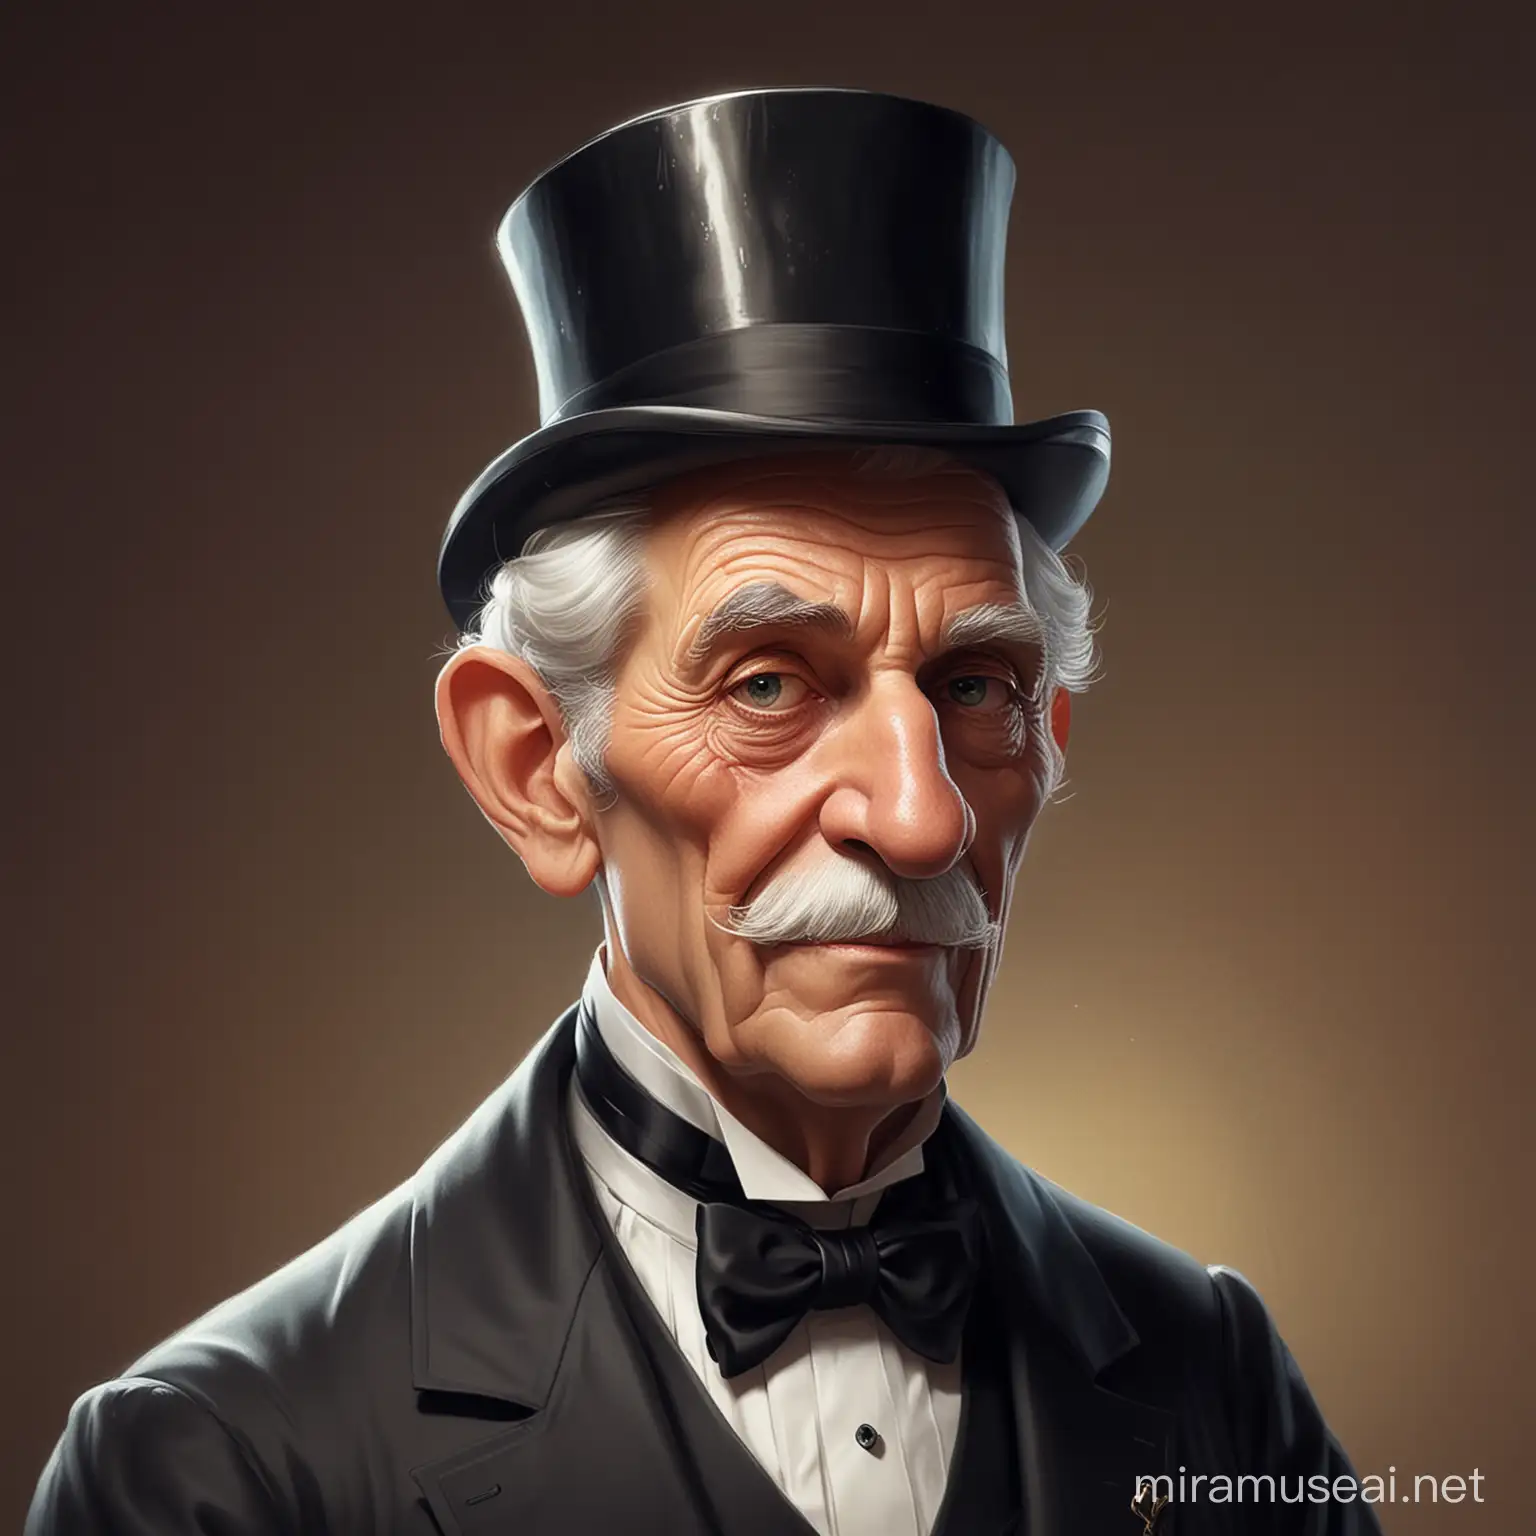 ridiculously fancy cartoonish old butler, portrait